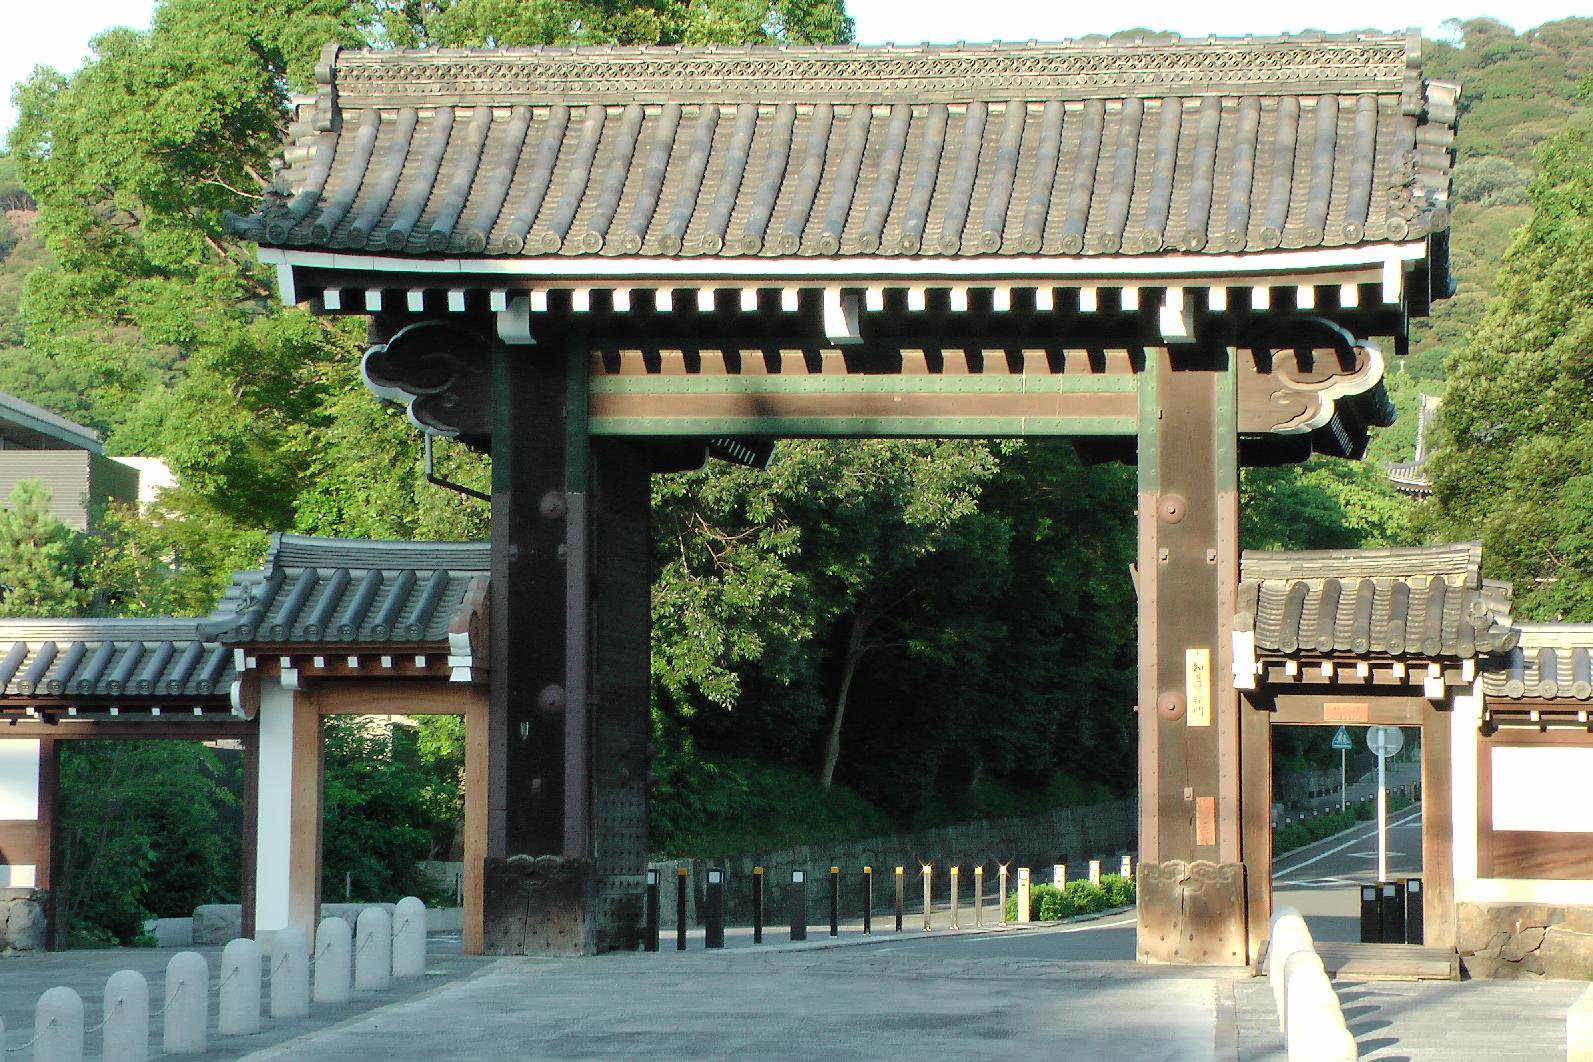 Another entrance gate to the Yasaka Shrine temple complex